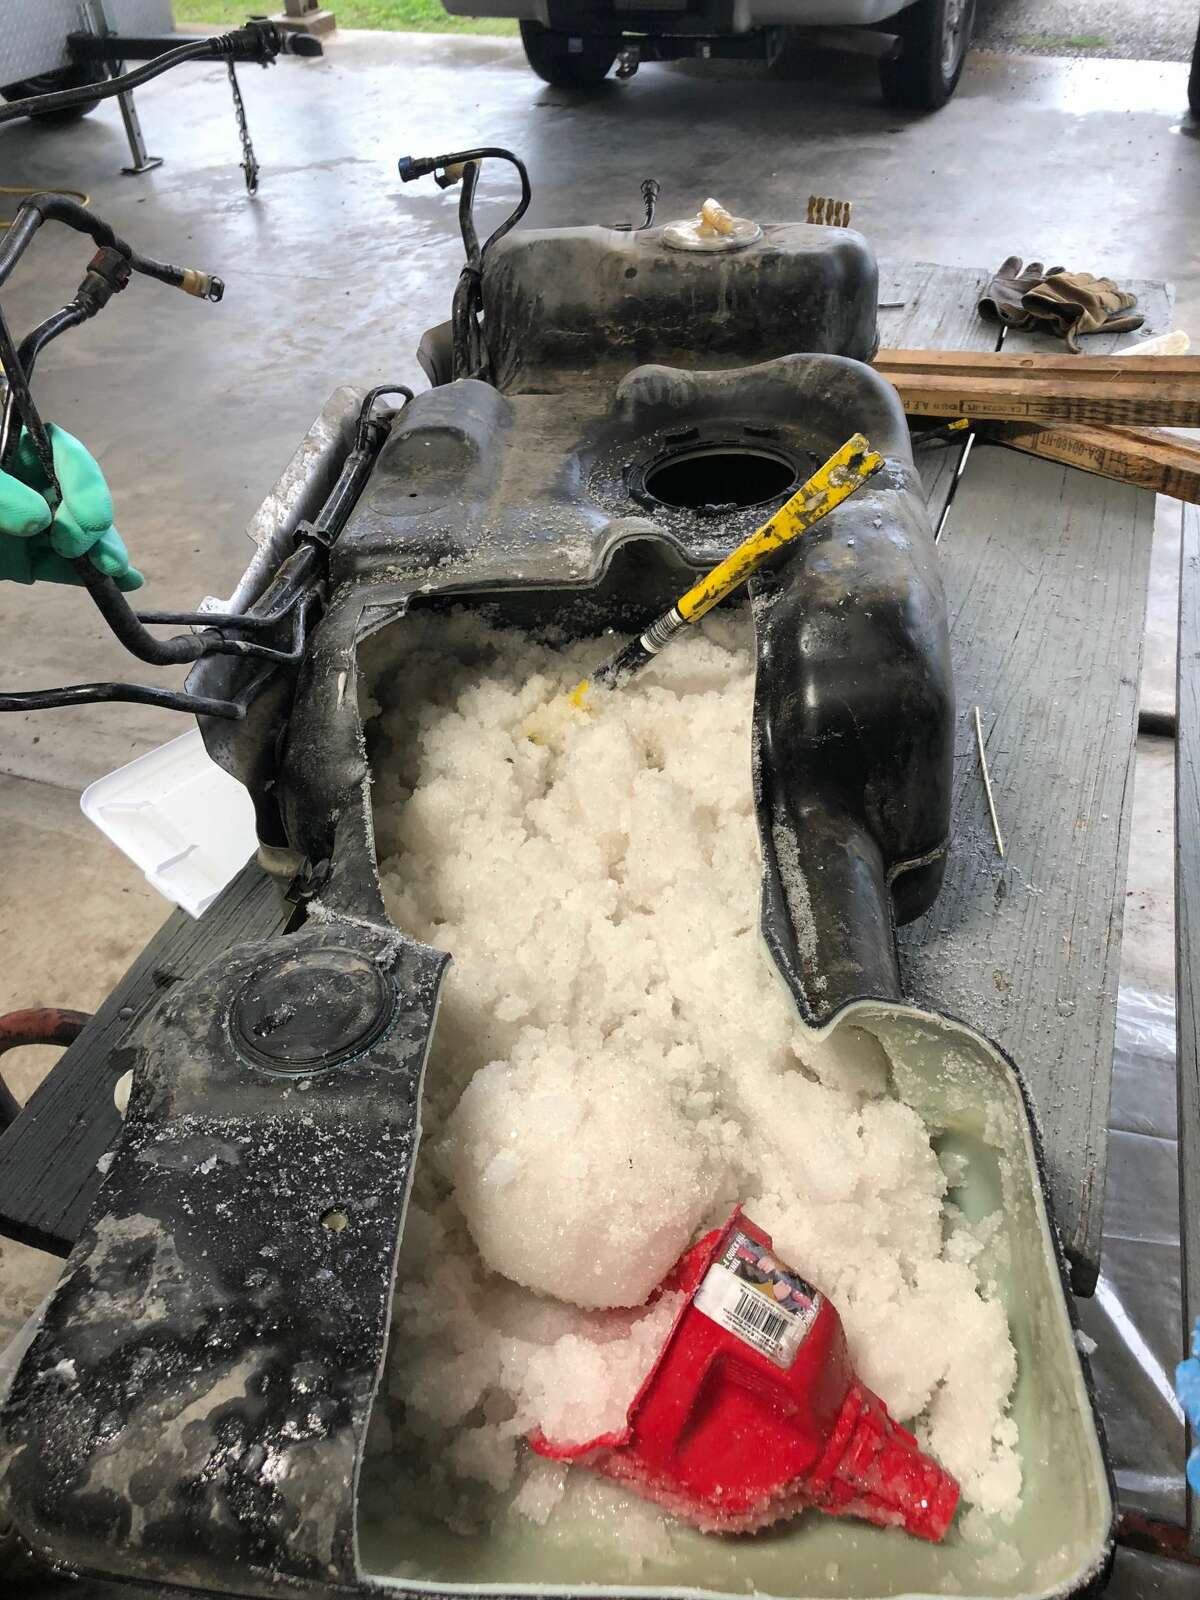 $6 million in liquid meth was discovered by K-9 Lobos in a hidden compartment of a 2007 Chevrolet Tahoe on Feb. 26, 2018.